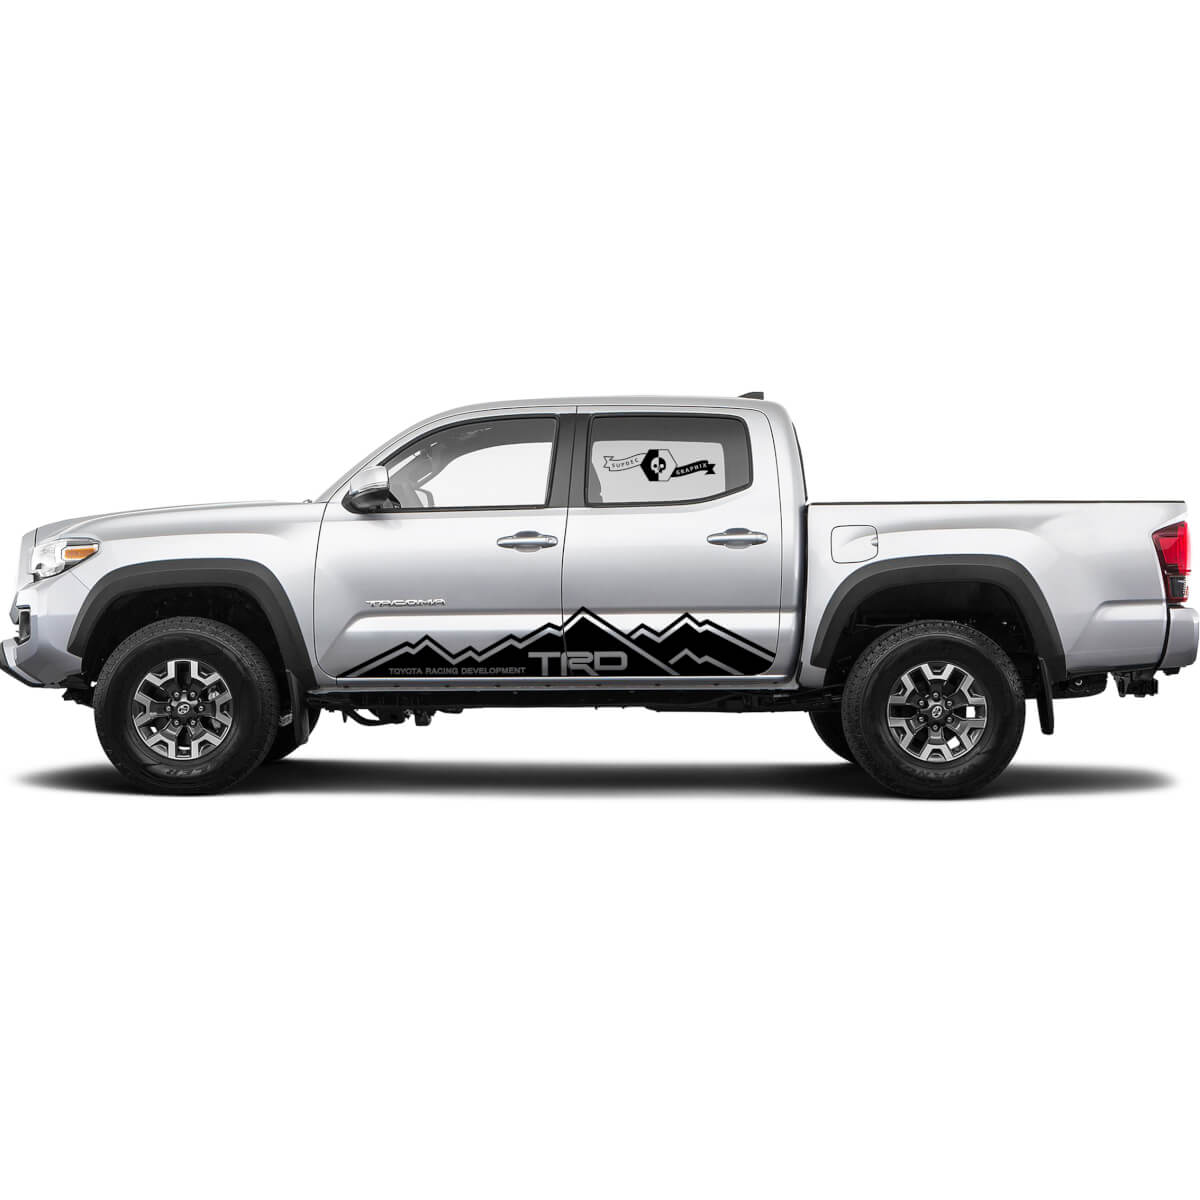 TRD off road Mountains Style for Side Rocker Panel Truck Decals Stickers for Tacoma Tundra Hilux 4Runner 8